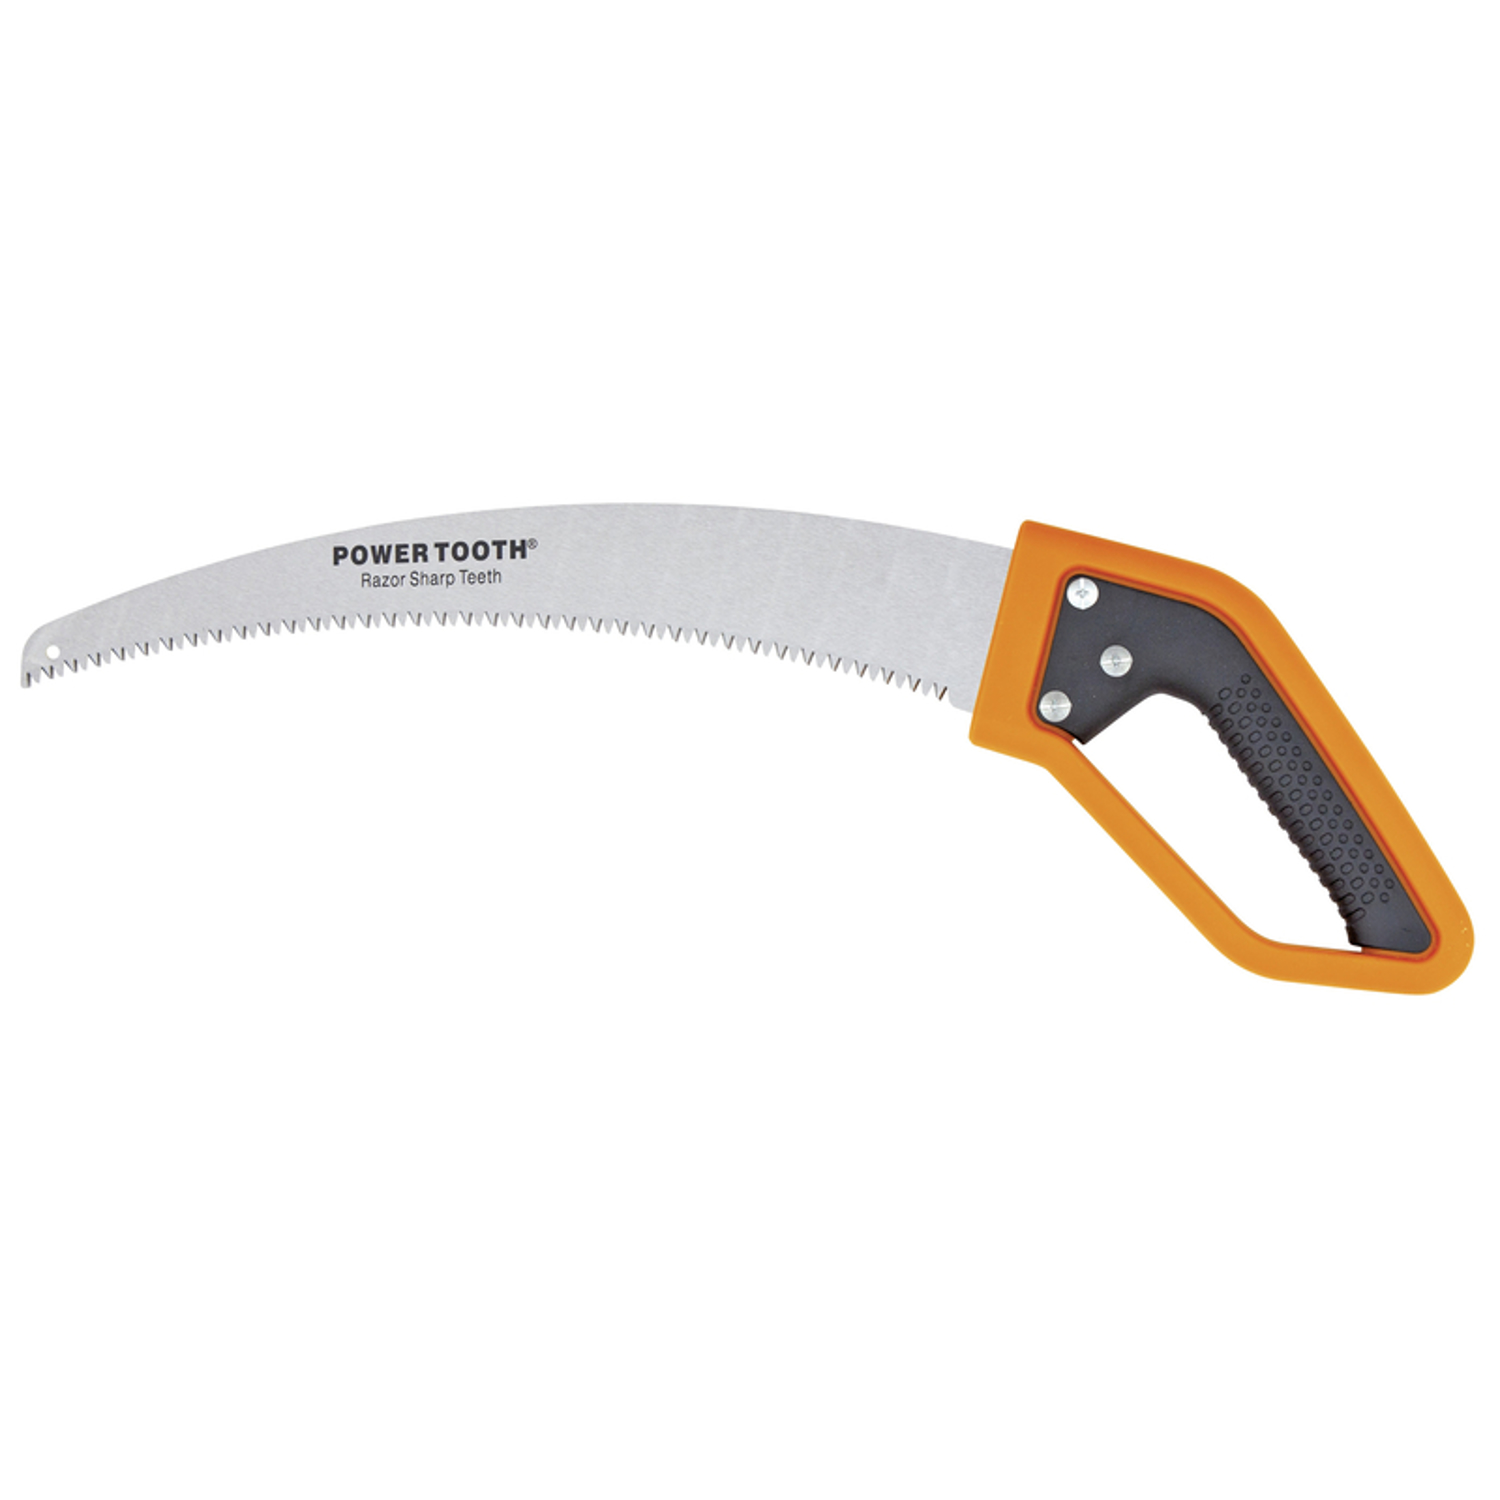 Photos - Saw Fiskars Power Tooth 6.5 in. Steel Curved Tree  393440-1001 